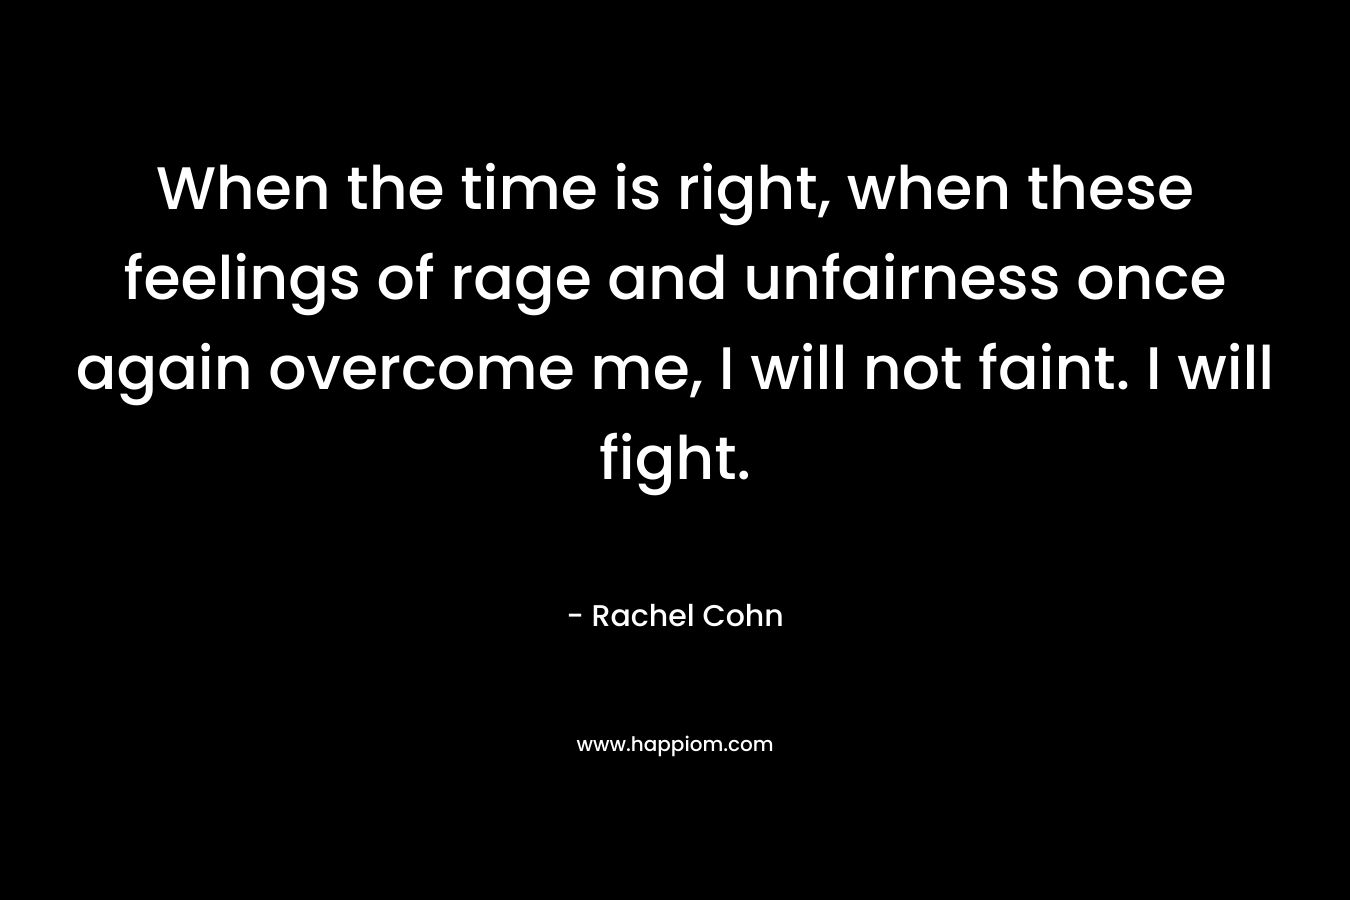 When the time is right, when these feelings of rage and unfairness once again overcome me, I will not faint. I will fight. – Rachel Cohn